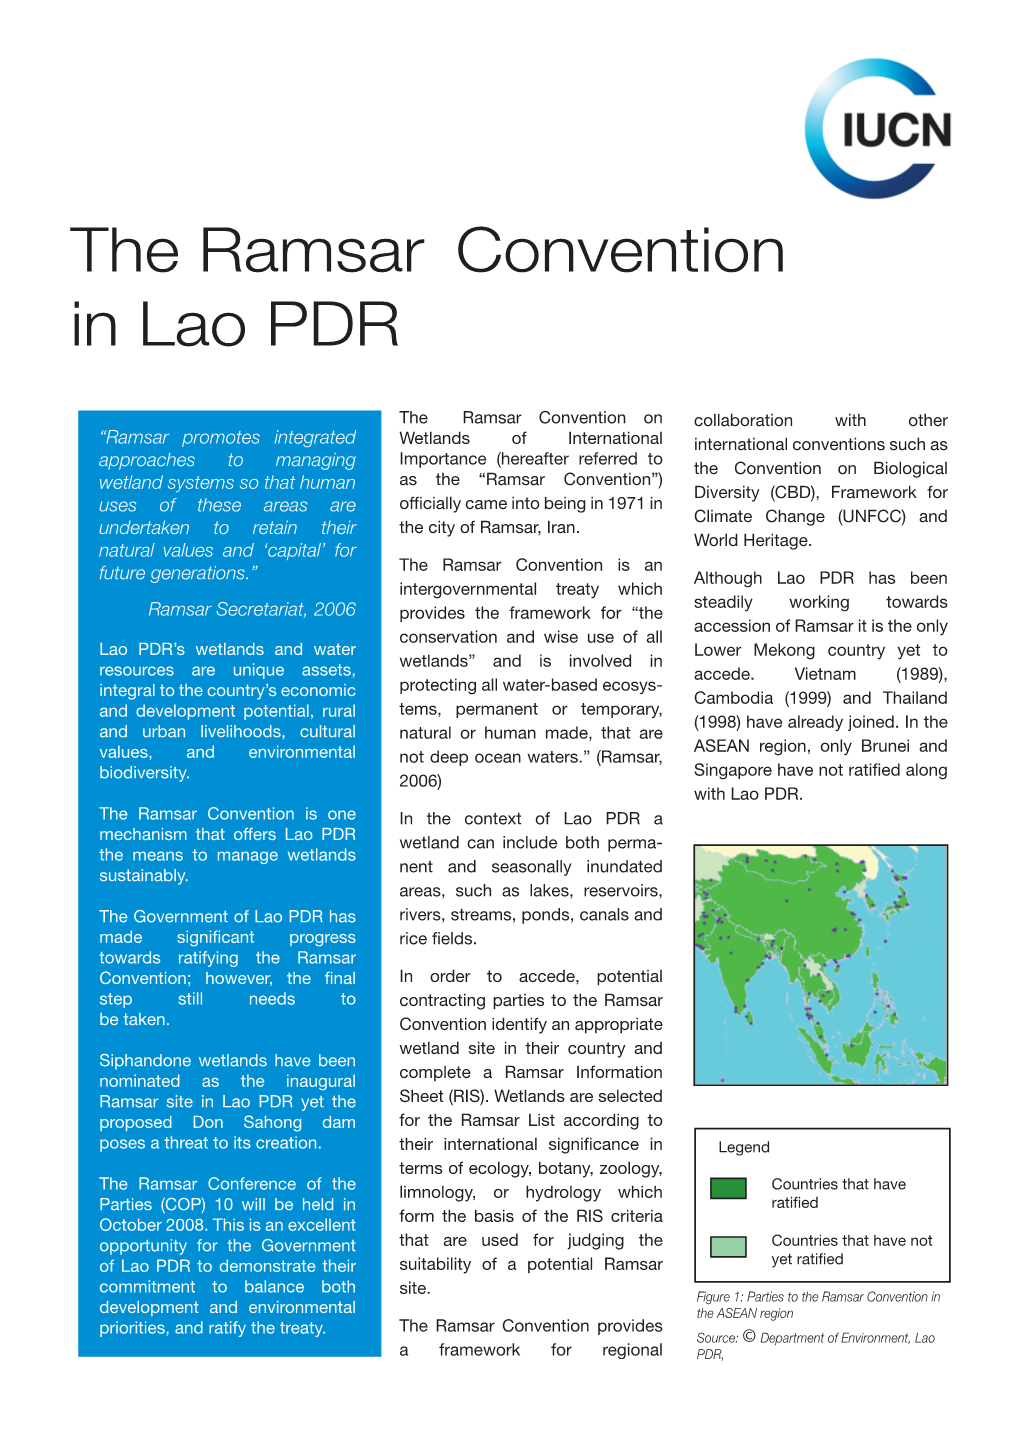 The Ramsar Convention in Lao PDR